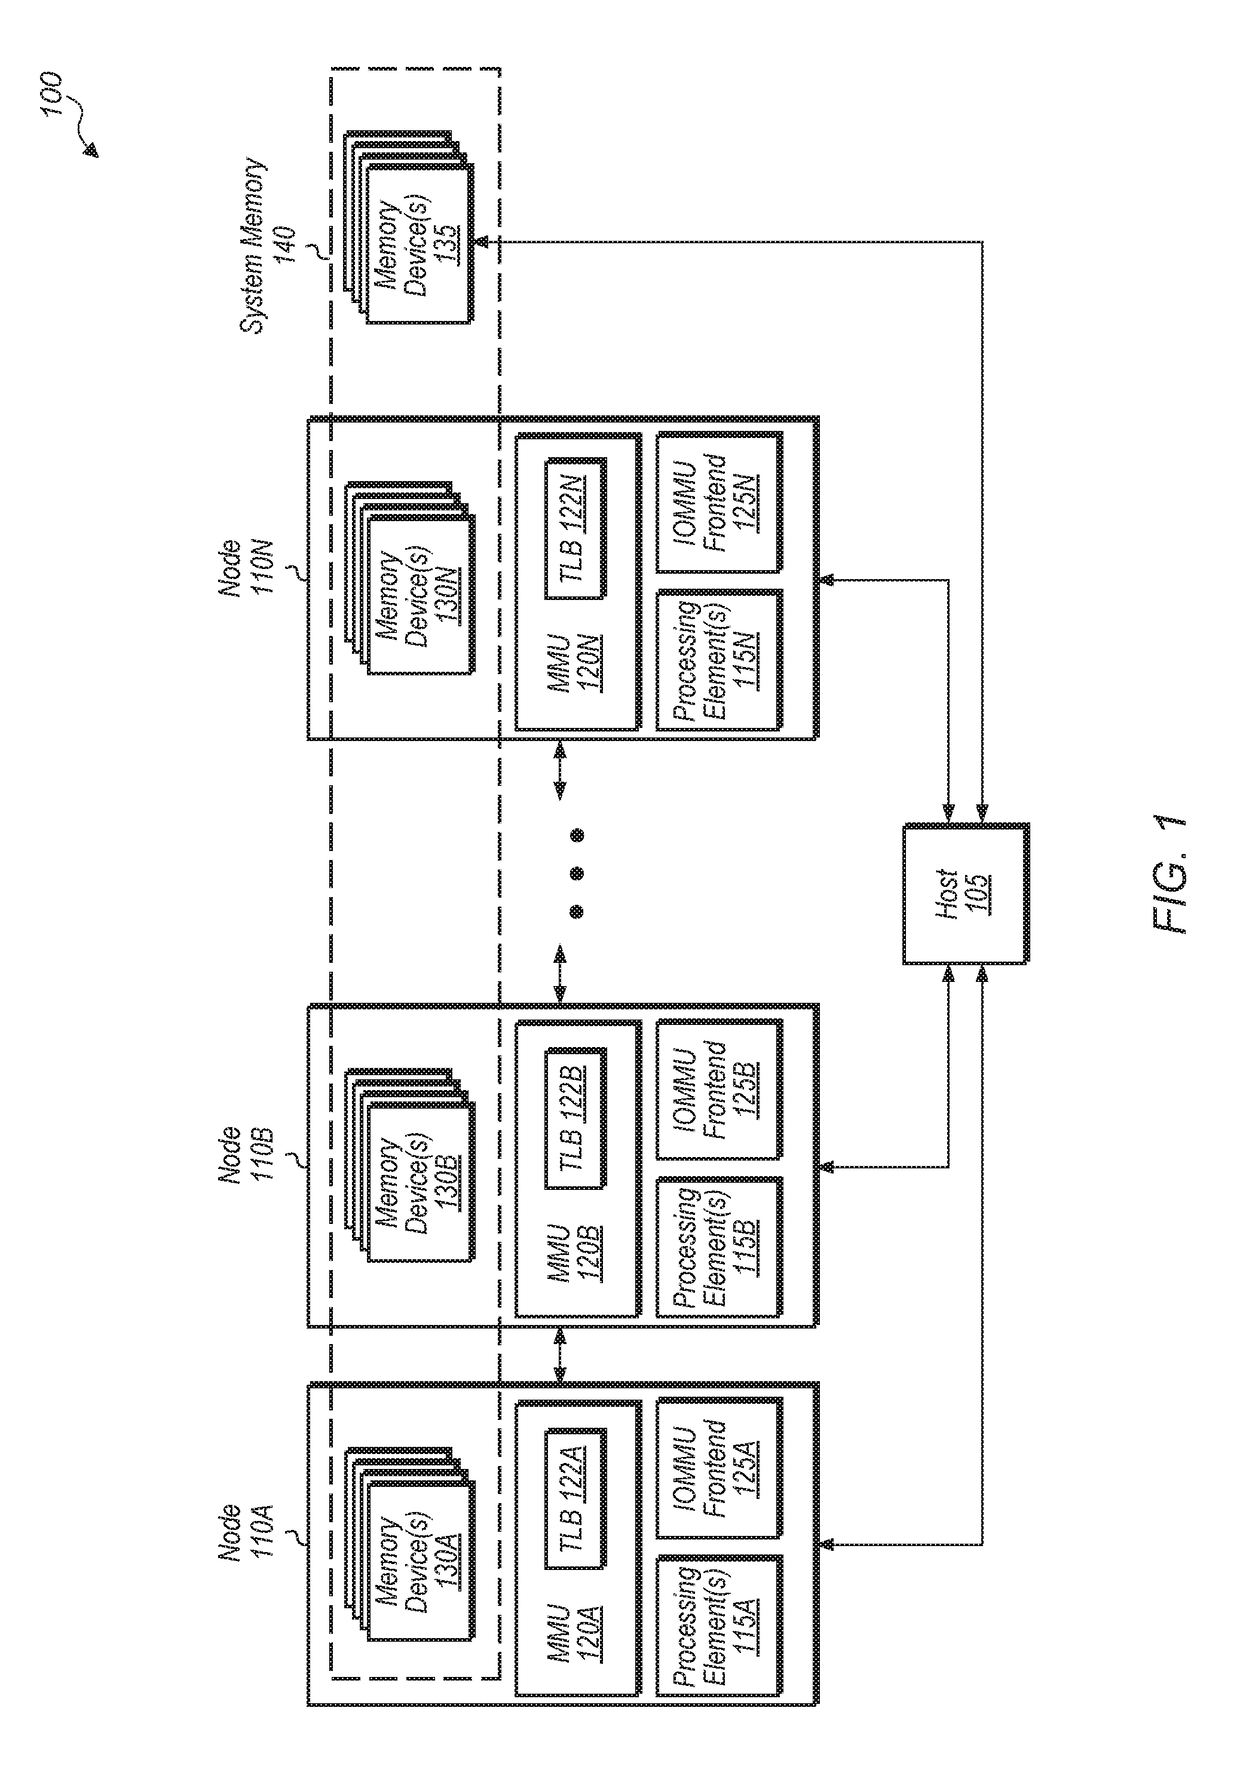 Centrally managed unified shared virtual address space